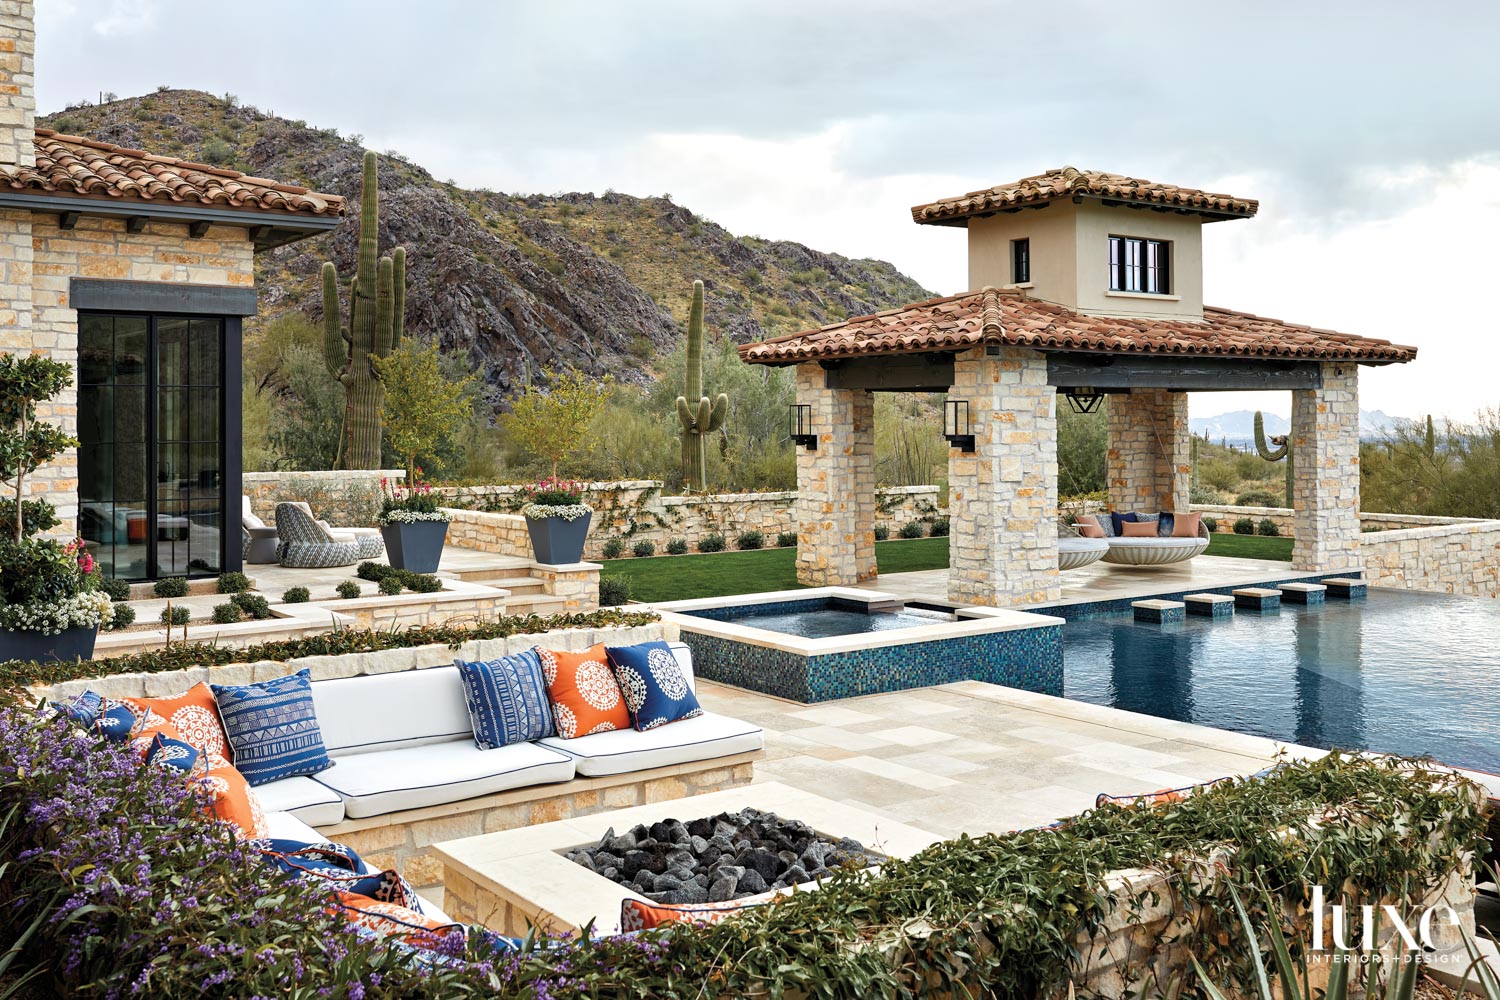 A poolside patio with a patio and a ramada on the adjoining side. Mountain views are in the background.